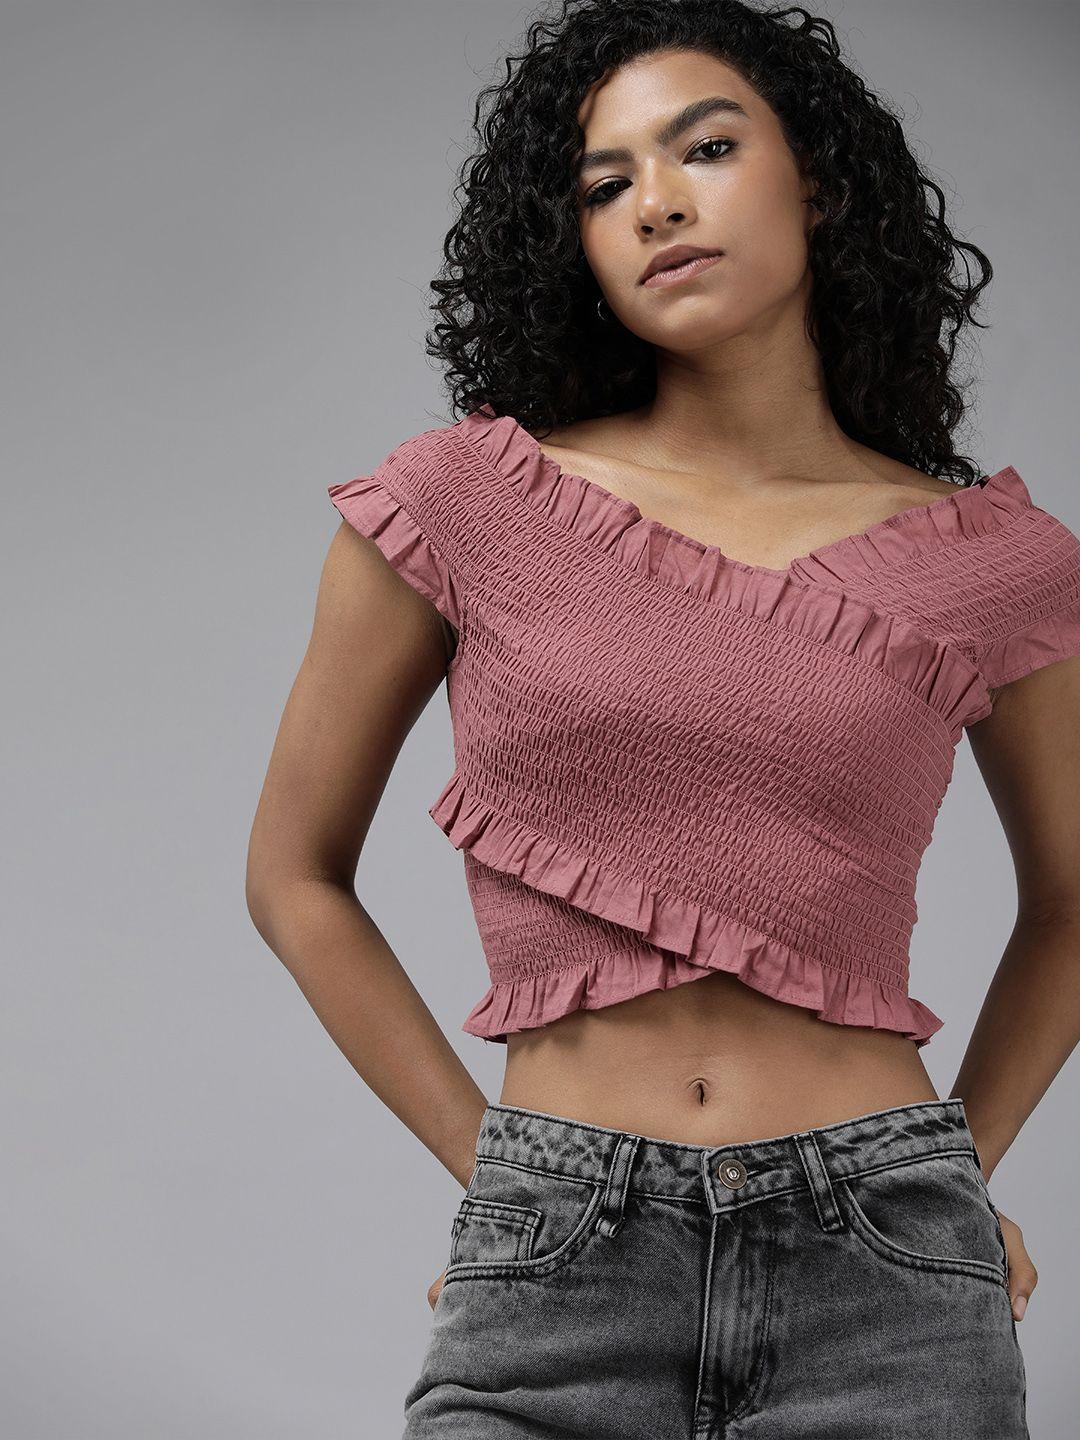 the roadster lifestyle co. ruffles smocked pure cotton crop top